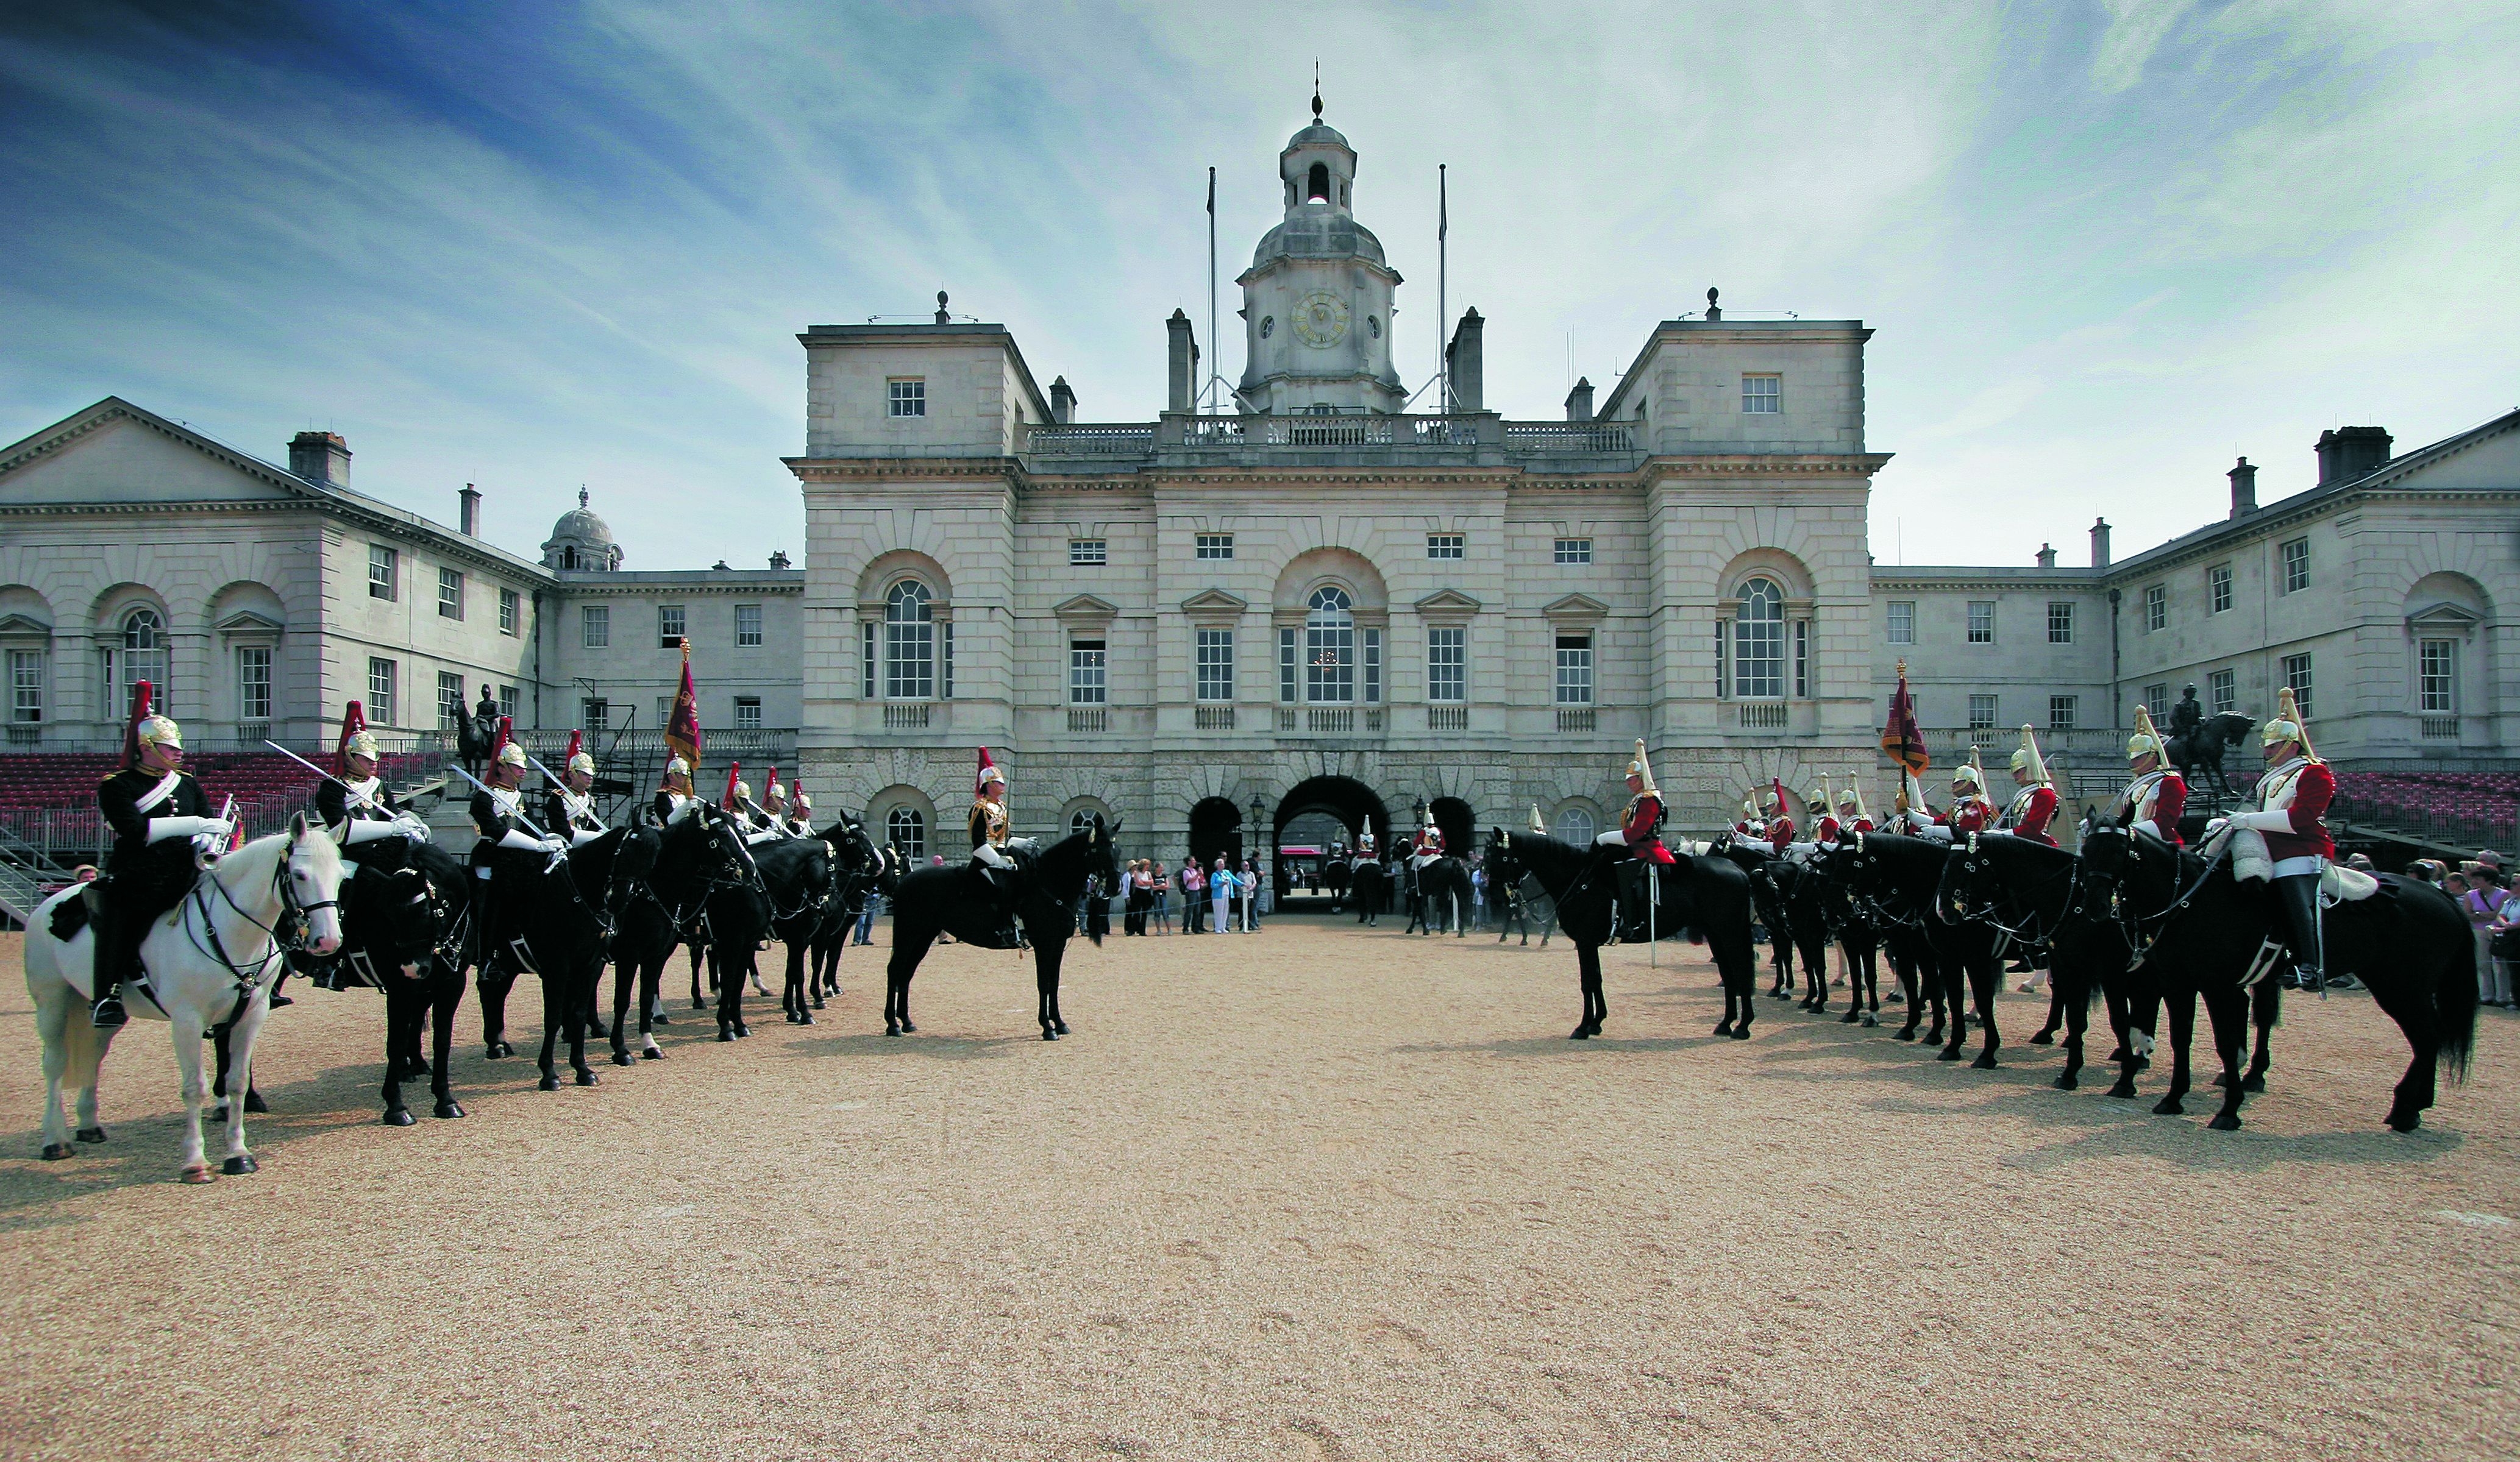 The Queen's Life Guard on Horse Guards' Parade